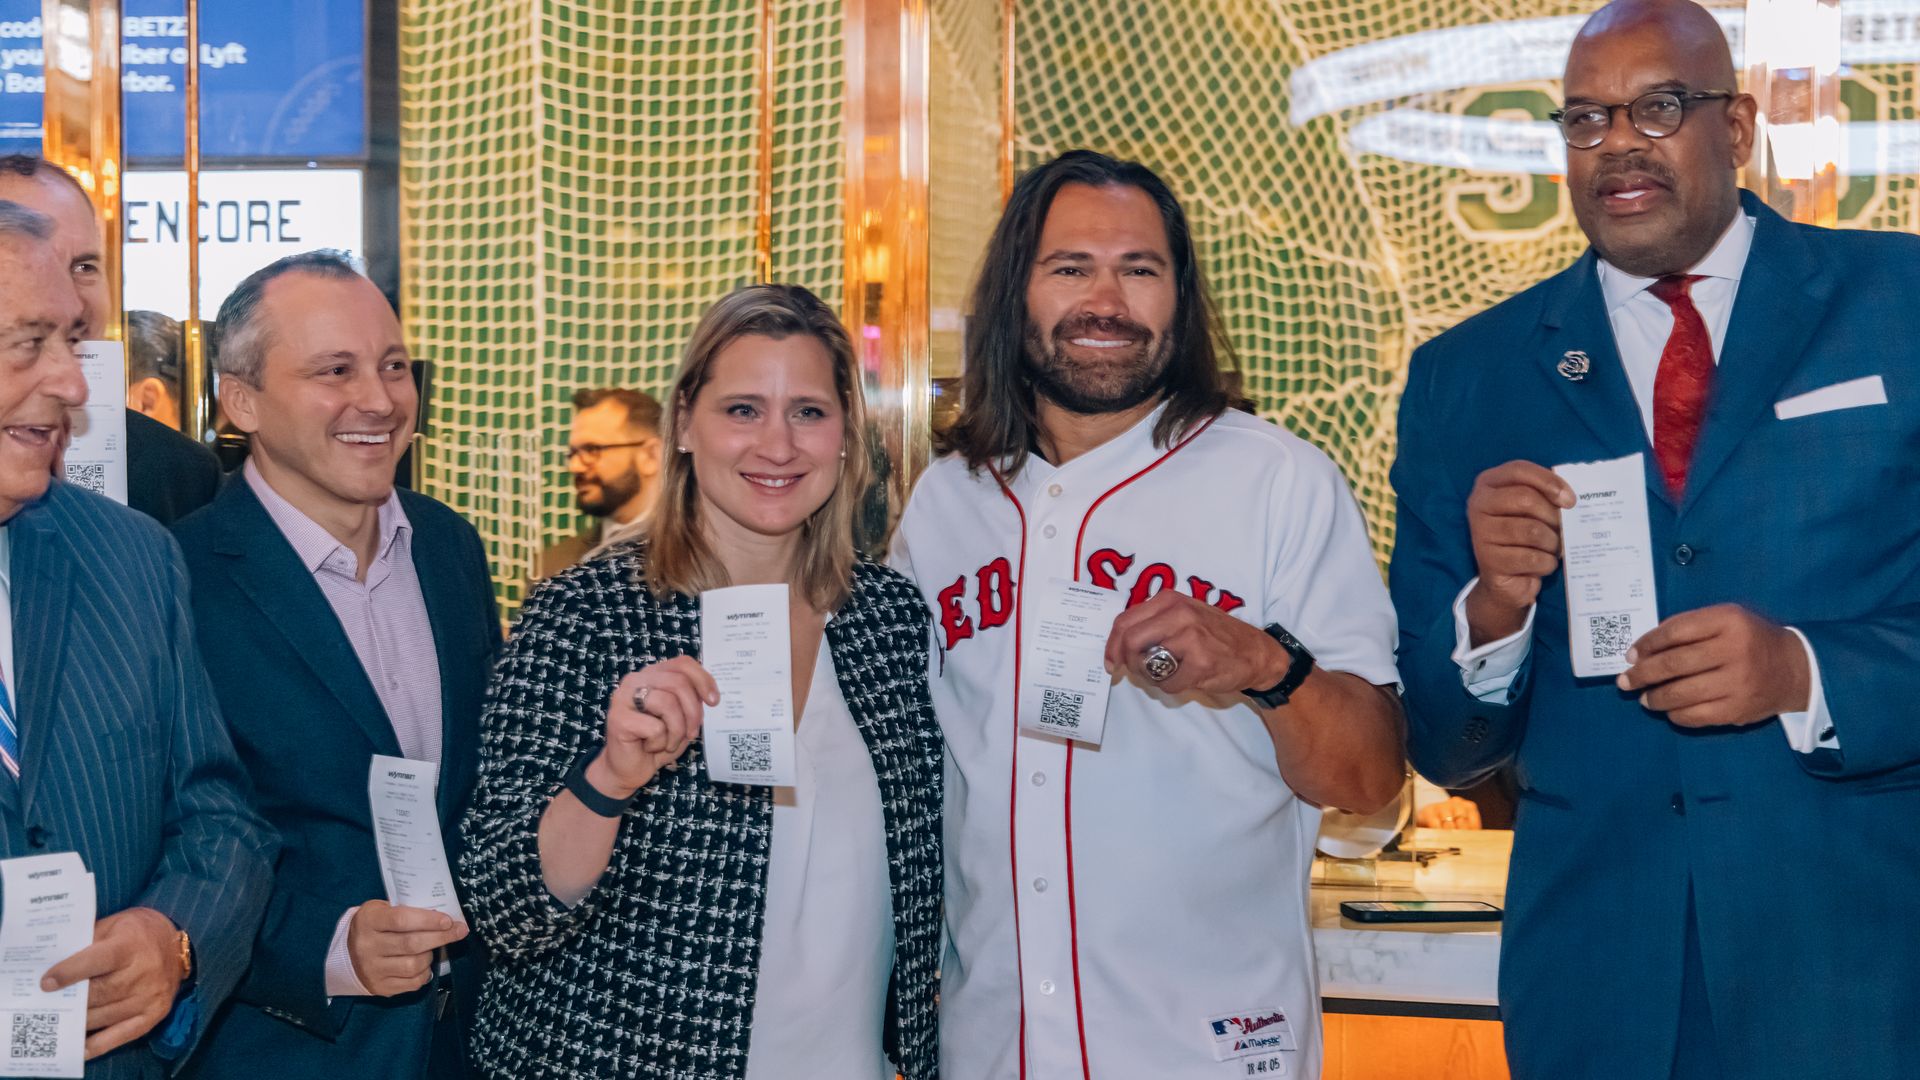 Former Olympic hockey player Angela Ruggiero (center) shows her ticket alongside former Red Sox player Johnny Damon (right) by Encore's betting windows. On the left is Rep. Aaron Michlewitz.